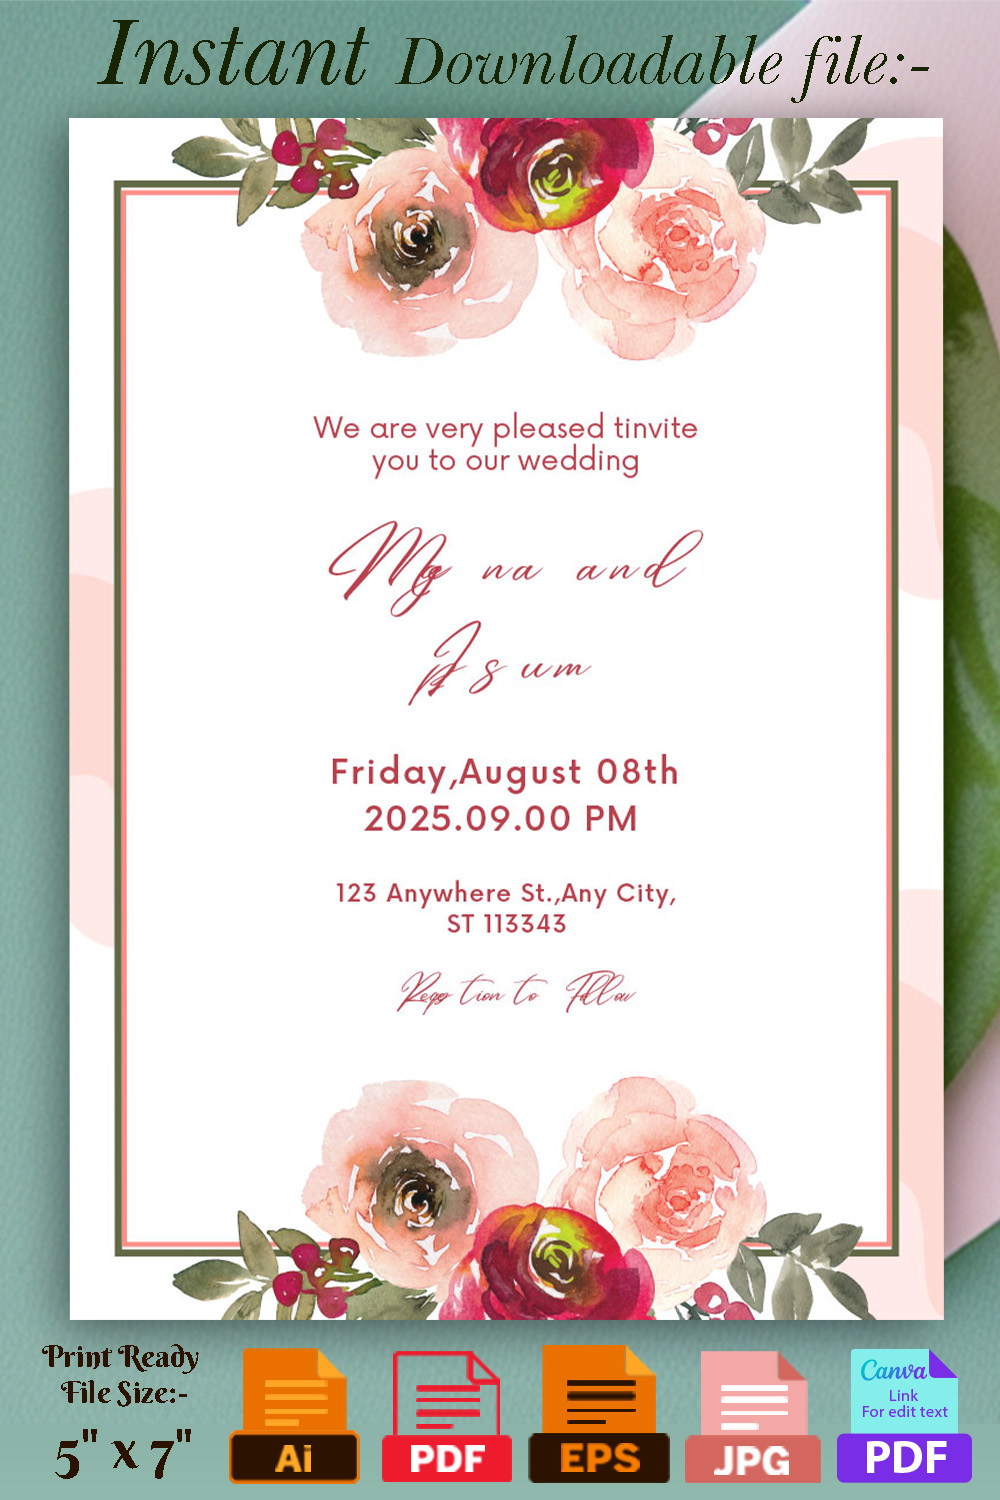 Image of irresistible wedding invitation with flowers.